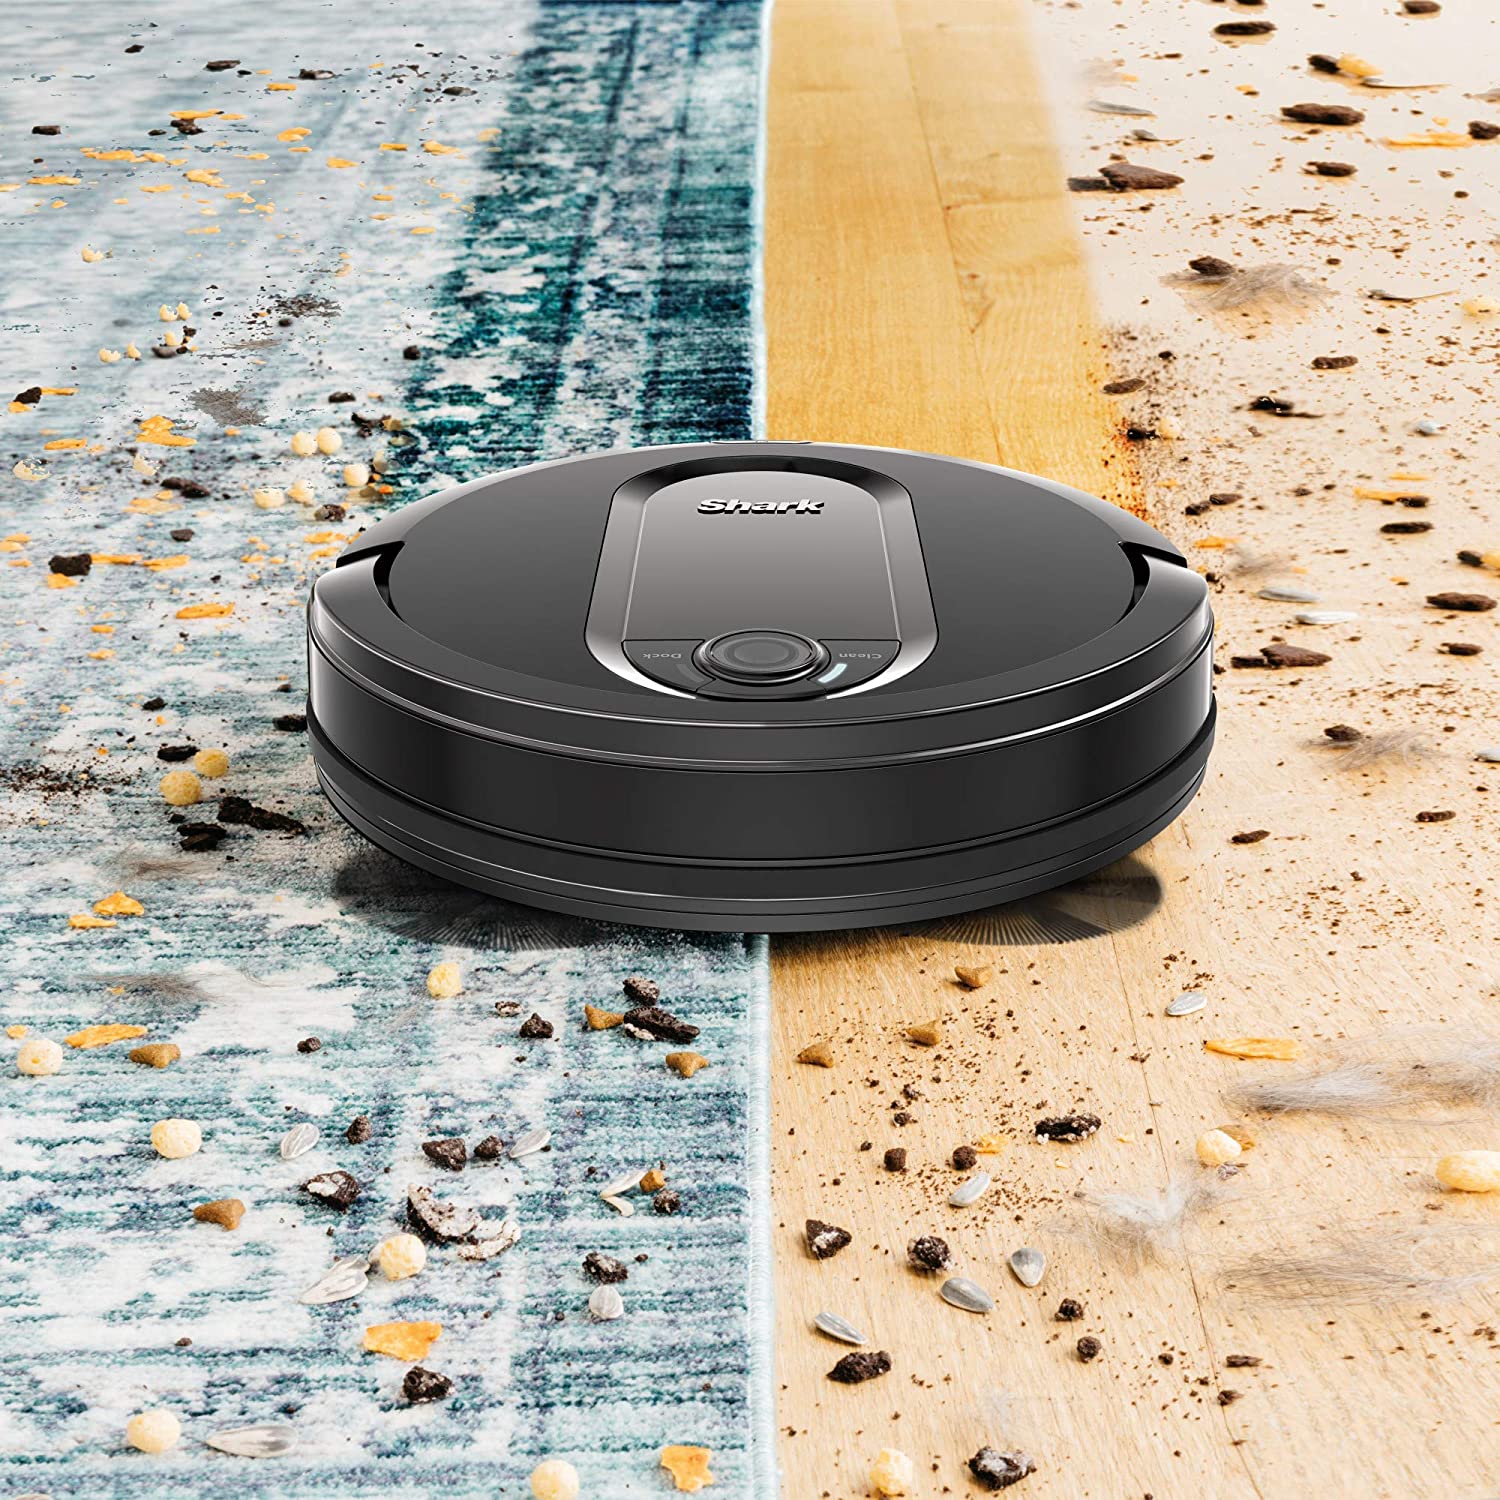 Restored Shark IQ Robot RV1001 AppControlled Robot Vacuum with Wifi and Home Mapping, Pet Hair Strong Suction with Alexa (Refurbished) - image 2 of 9